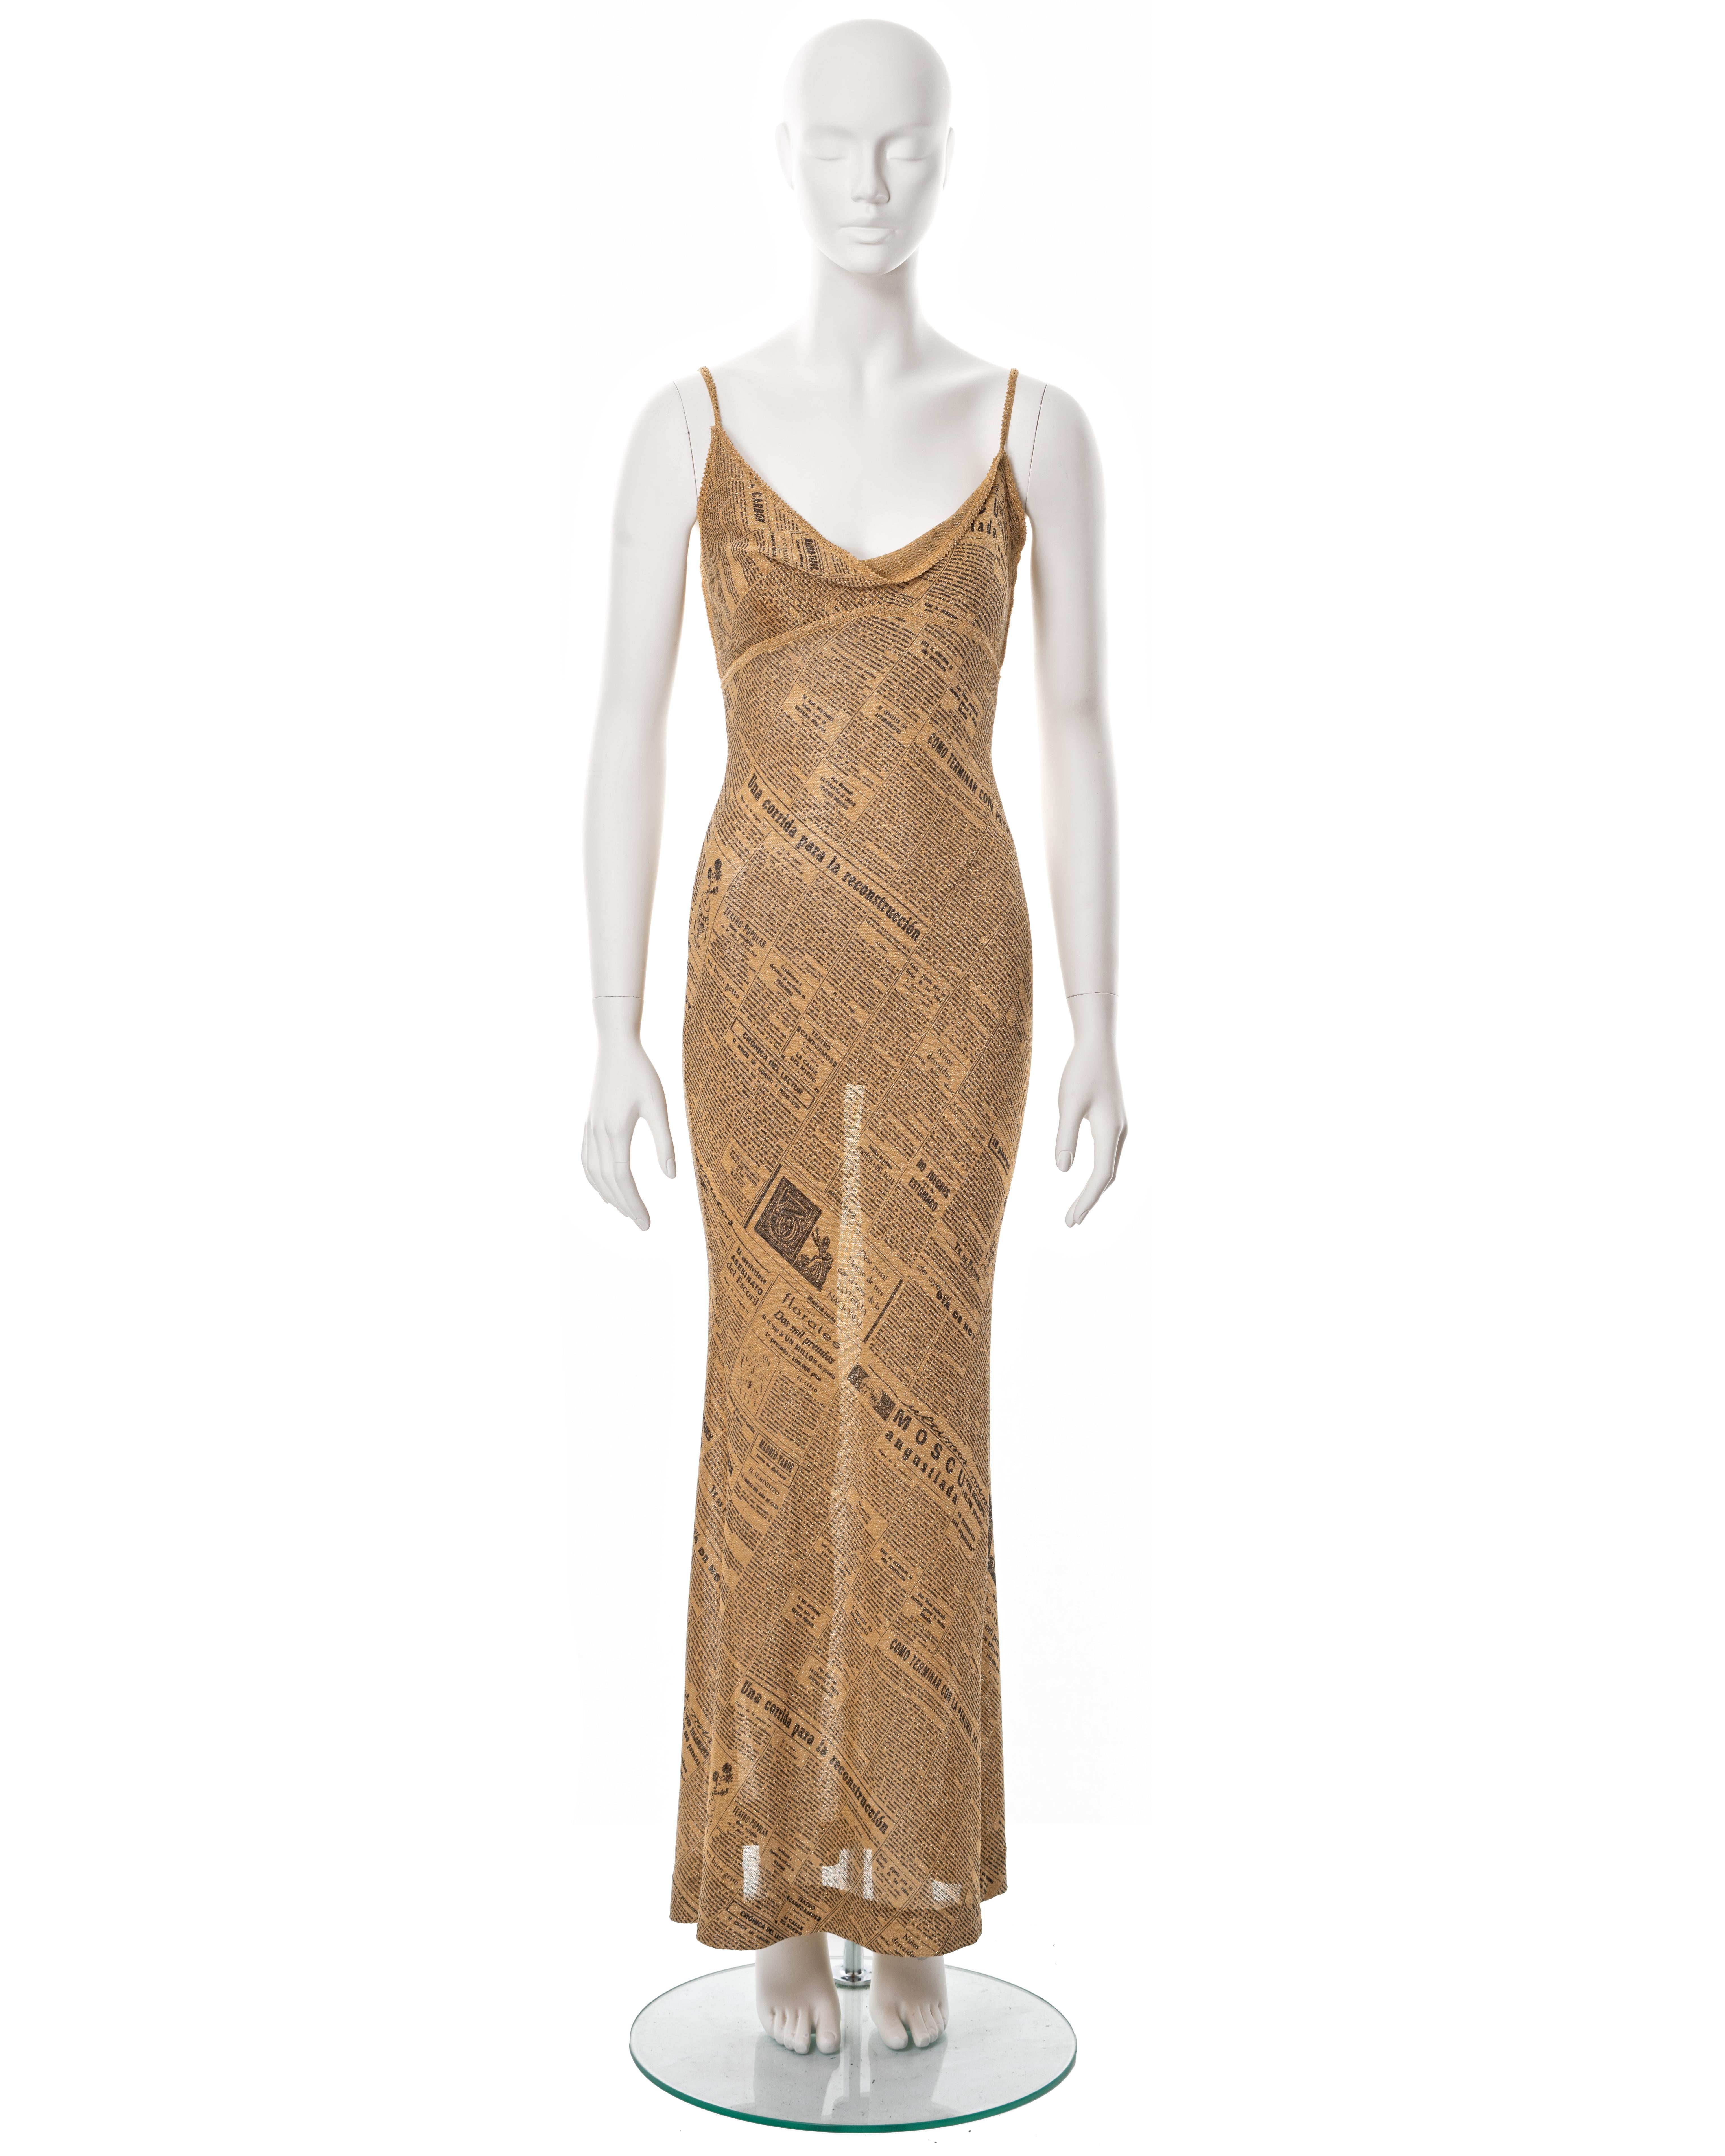 ▪ John Galliano evening dress
▪ Spring-Summer 2001
▪ Constructed from gold bias-cut knitted lurex with a black newsprint motif
▪ Asymmetric cowl neck
▪ Spaghetti straps
▪ Flared maxi skirt
▪ Size approx. Medium 
▪ Made in France

All photographs in